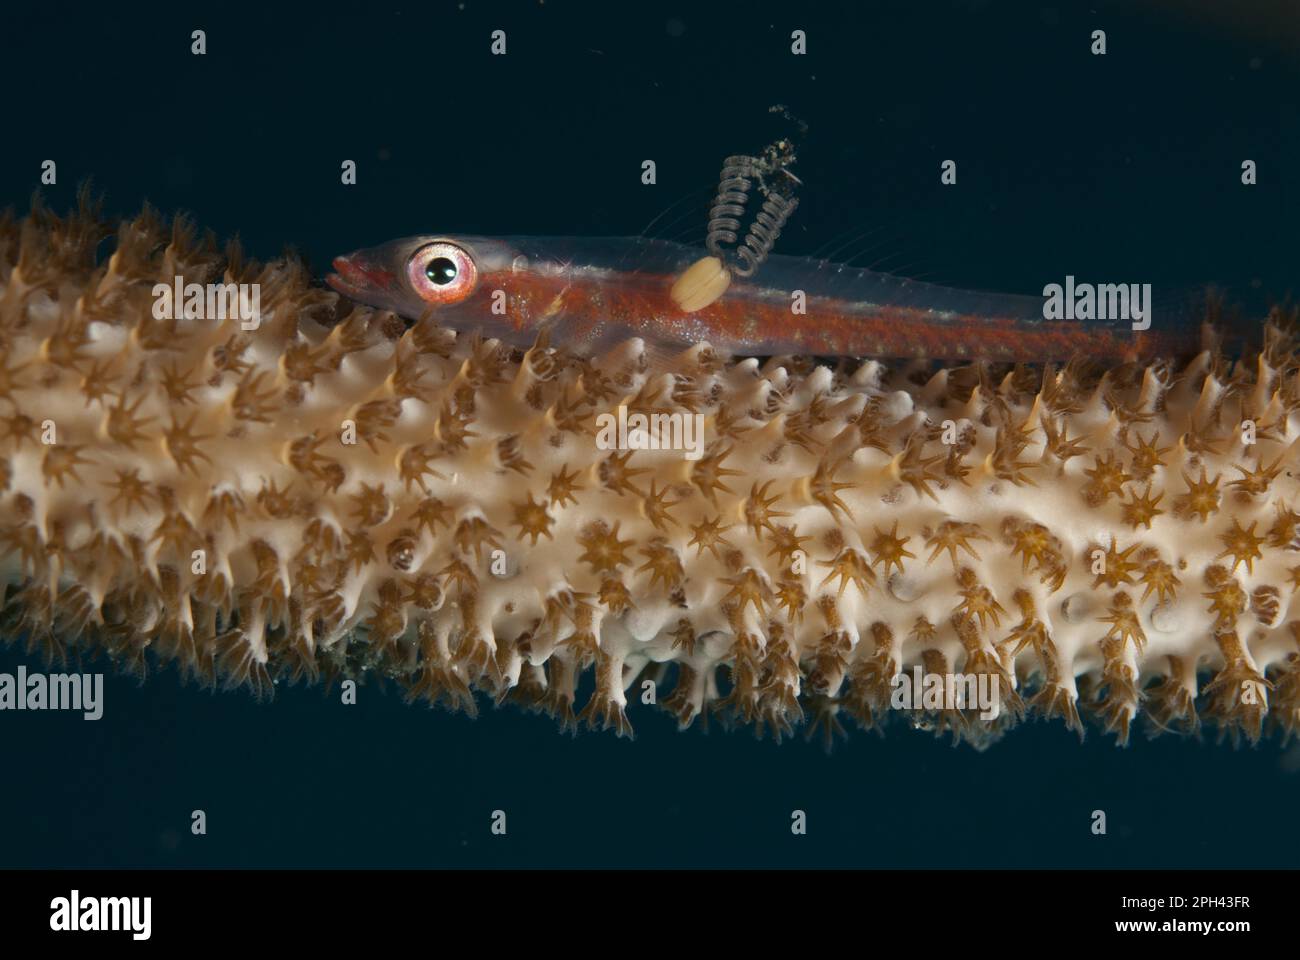 Large Whip Goby (Bryaninops amplus) adult, with female parasitic copepod with pair of egg sacs, resting on whip coral, Lembeh Straits, Sulawesi Stock Photo